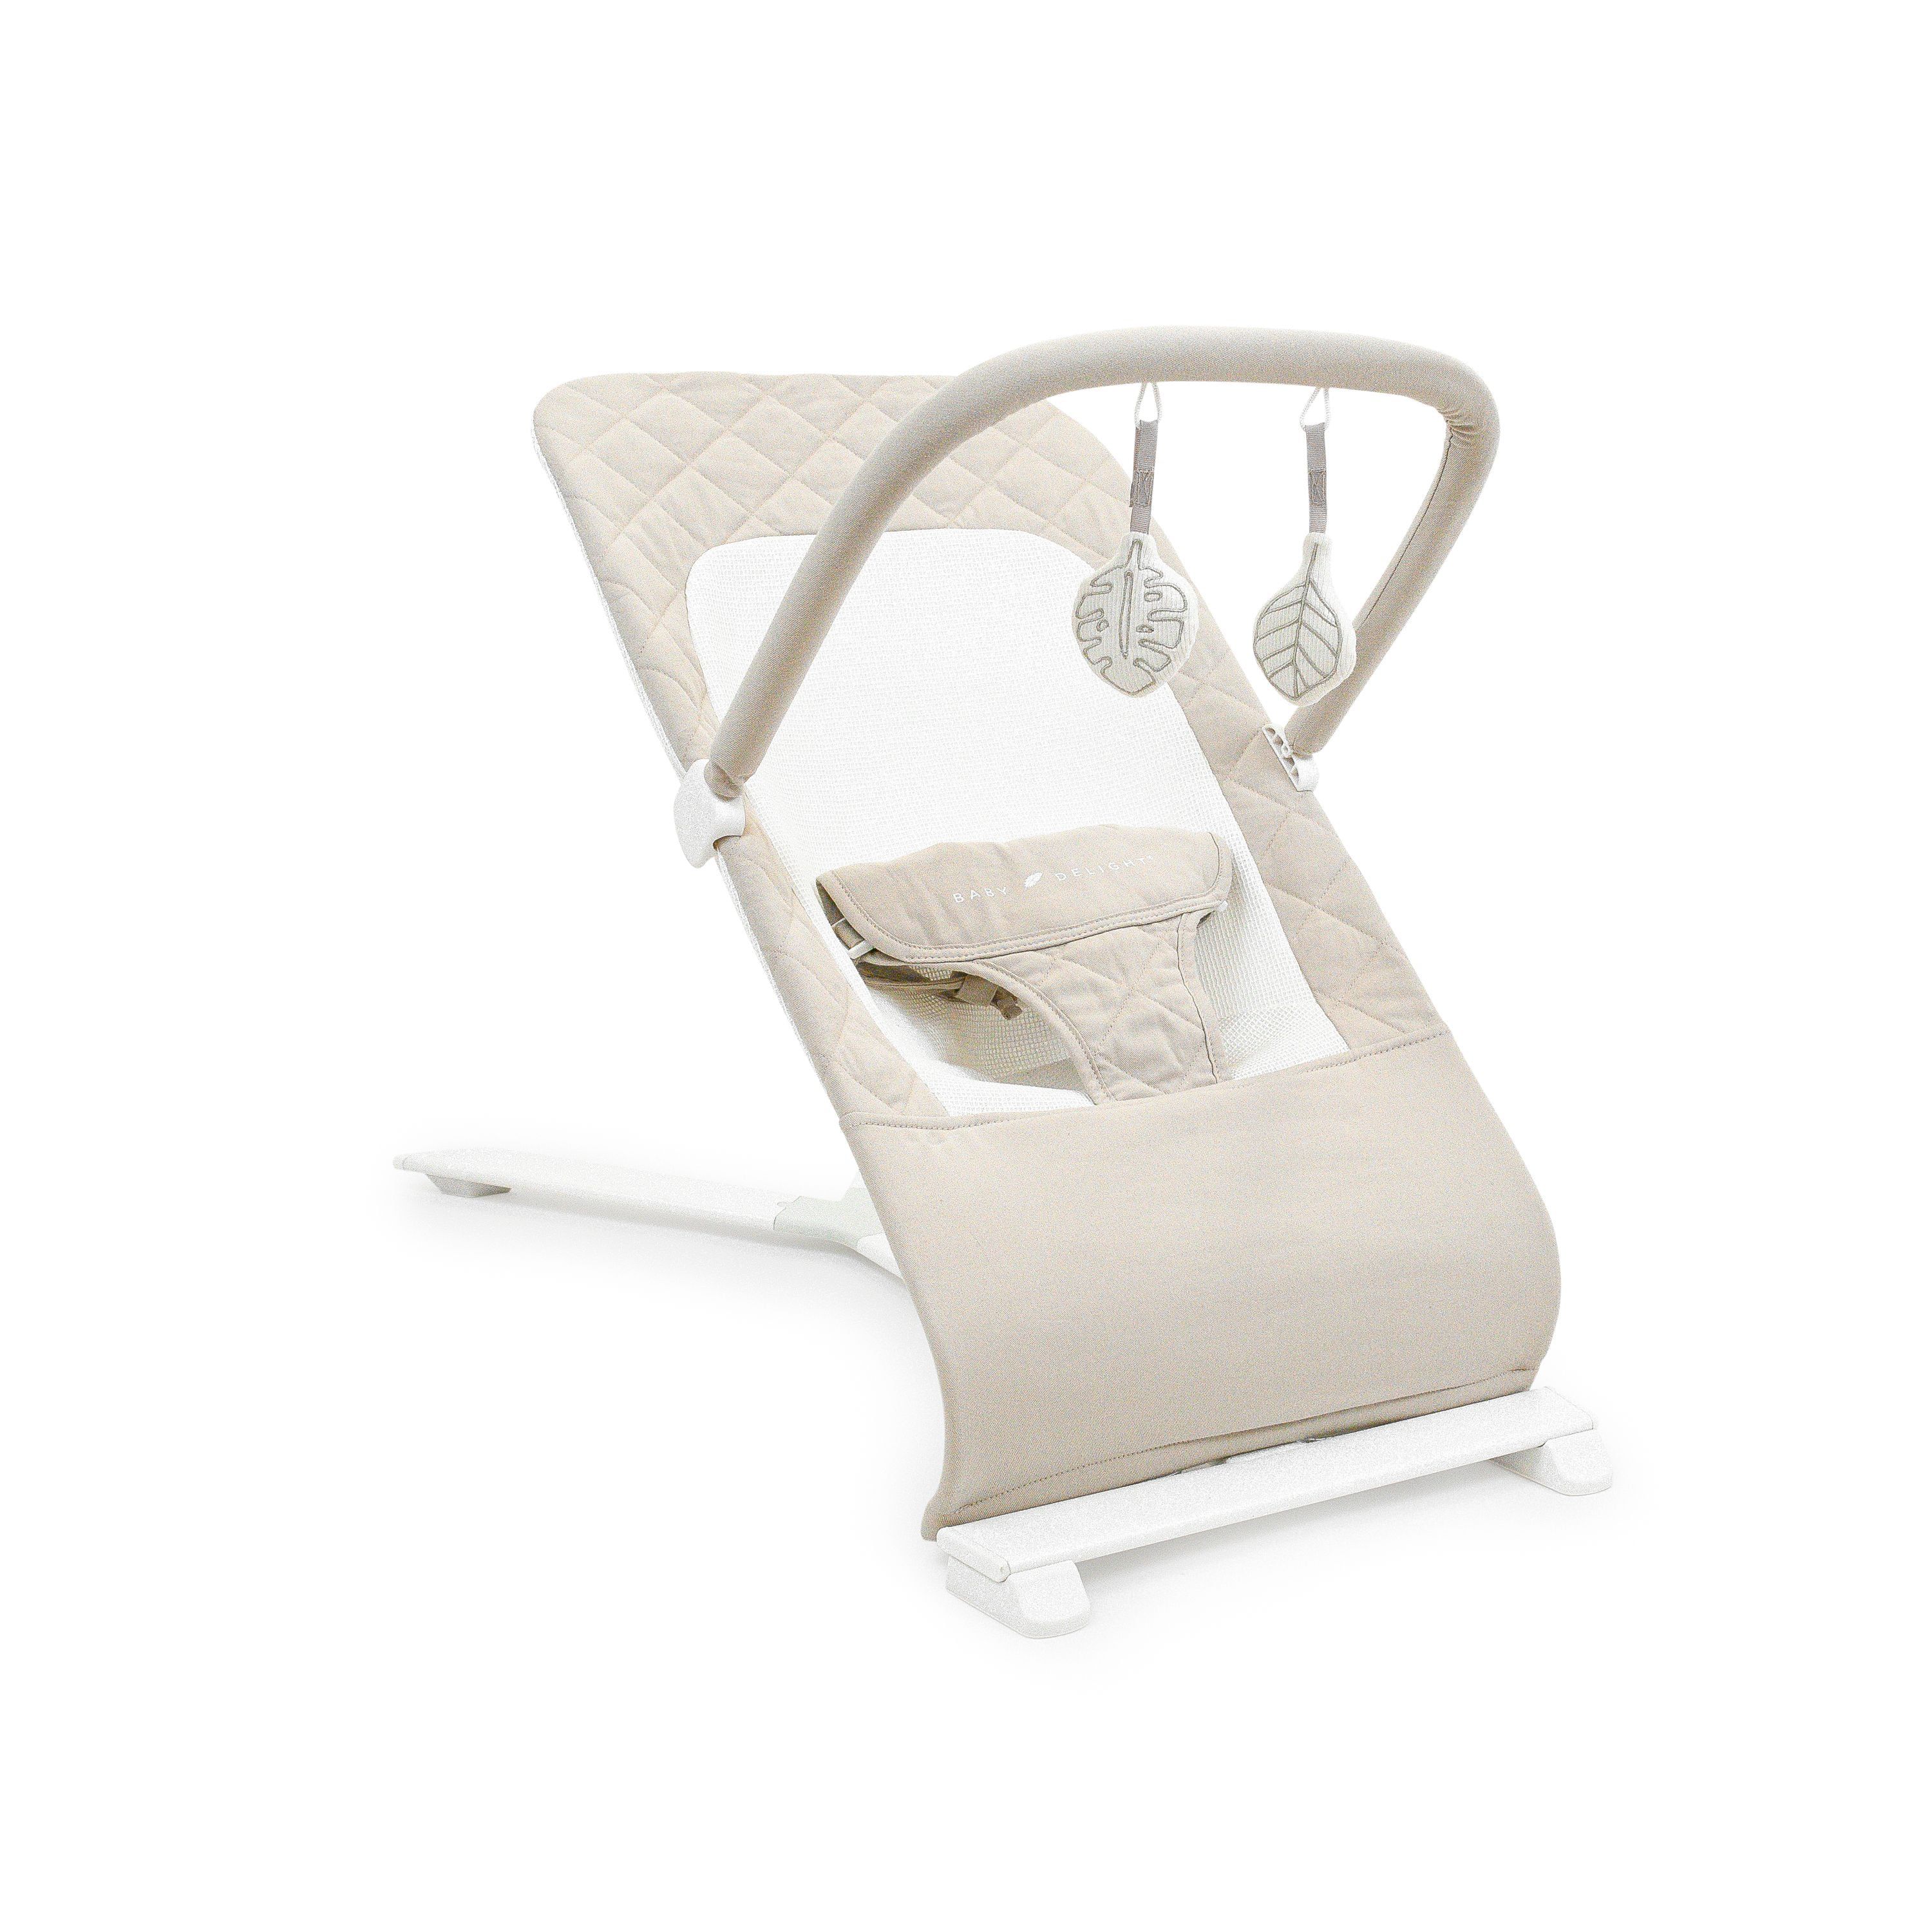 Baby Delight Alpine Deluxe Portable Infant Bouncer, for 0-6 Months, Organic Oat | Walmart (US)